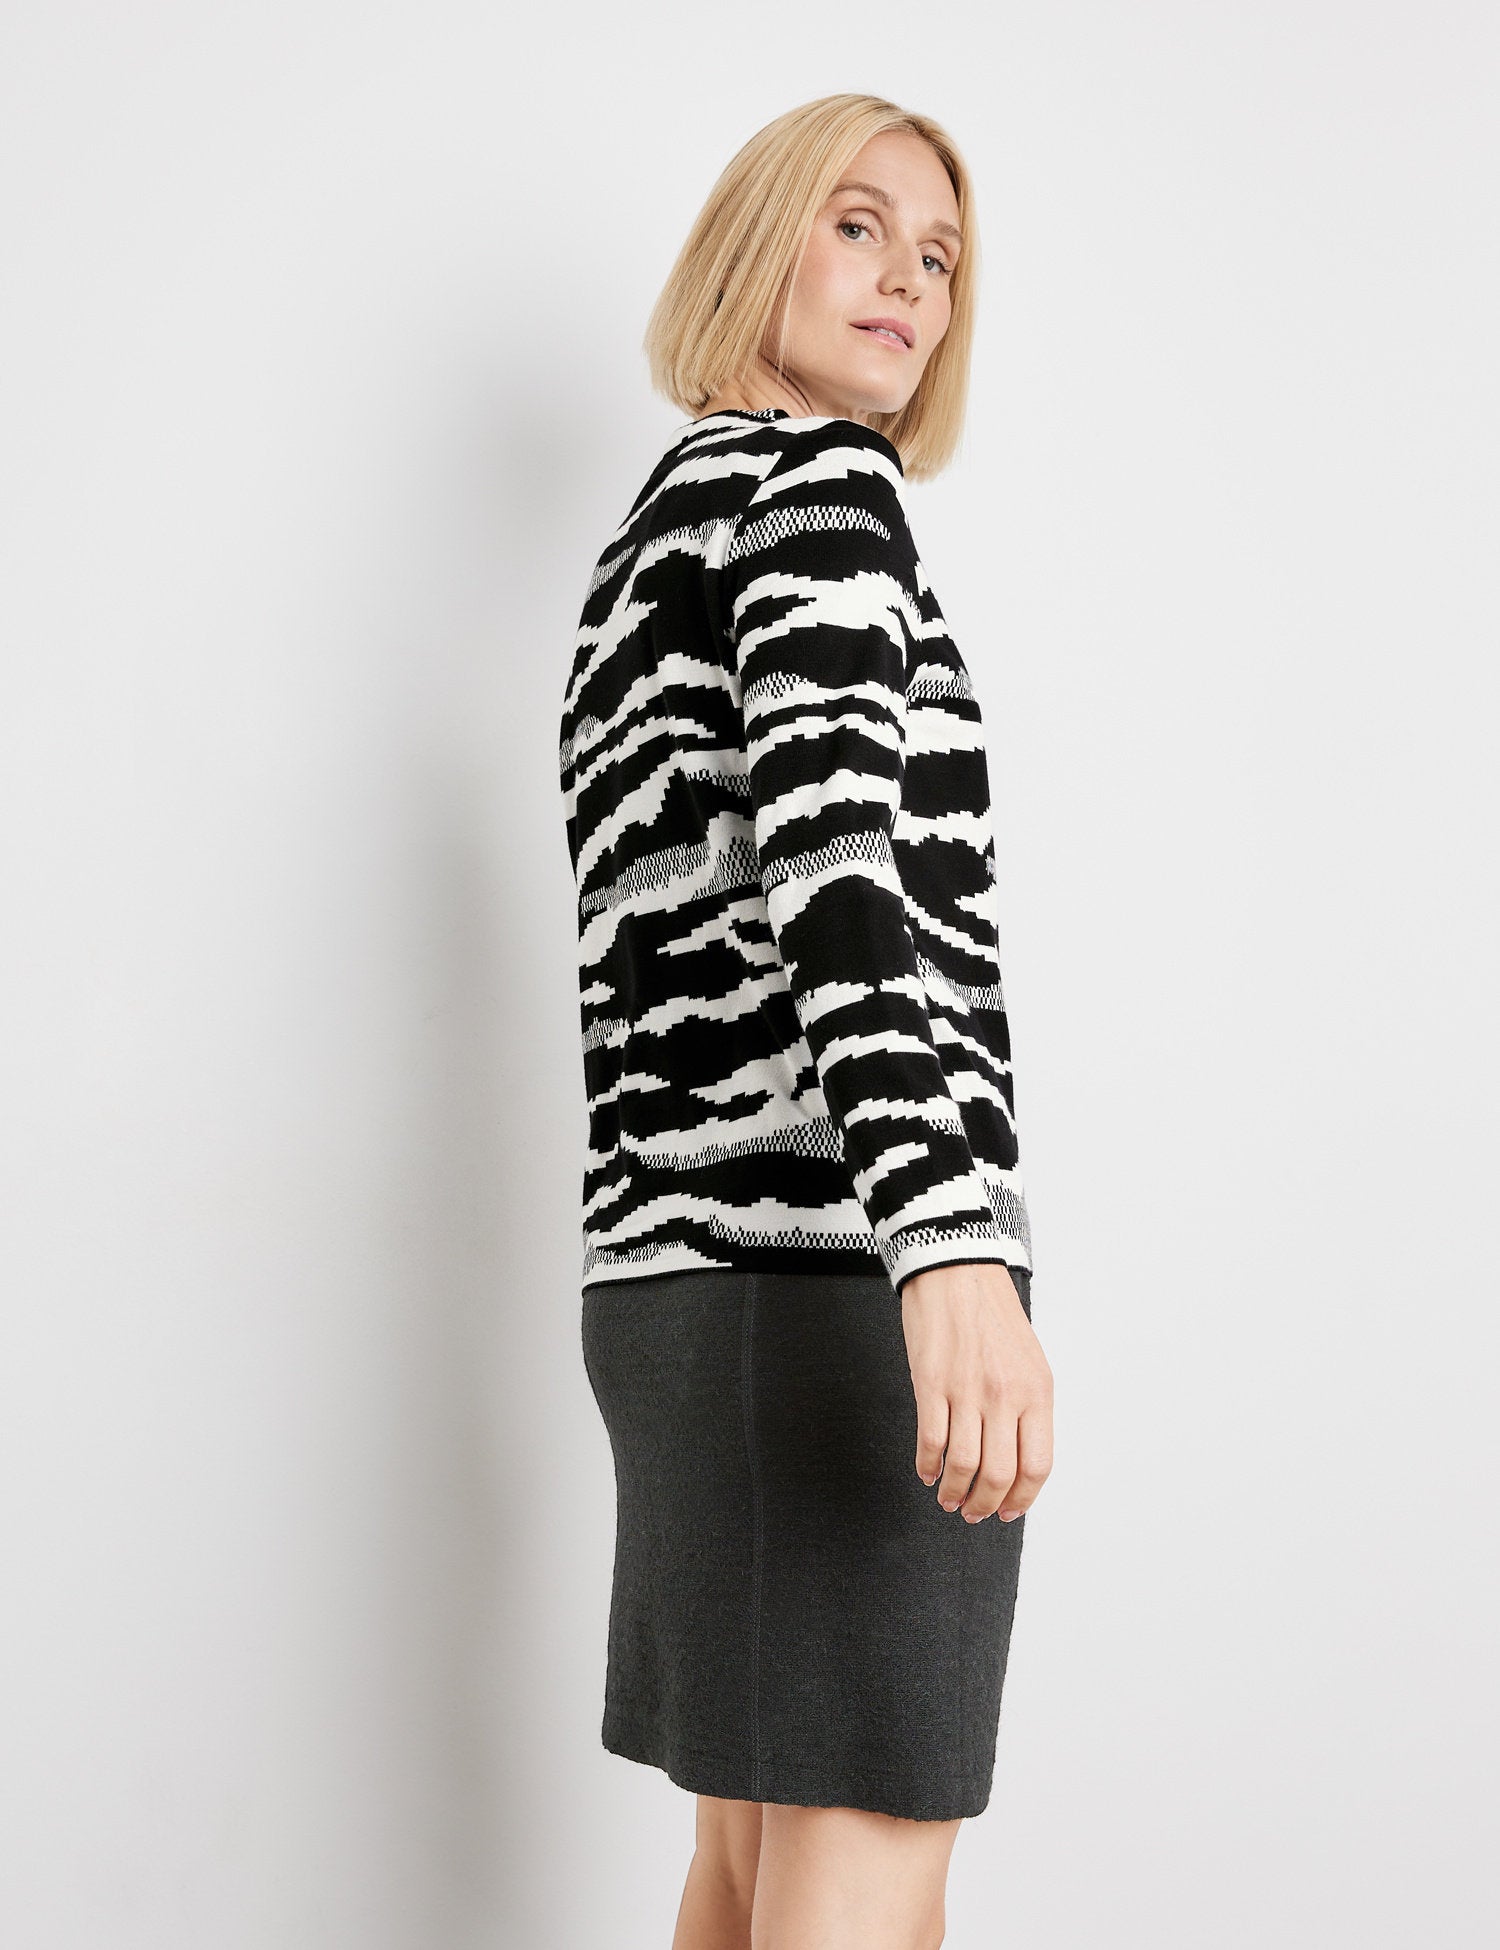 Jacquard Knit Jumper With A Short Stand-Up Collar_170587-44713_1090_06